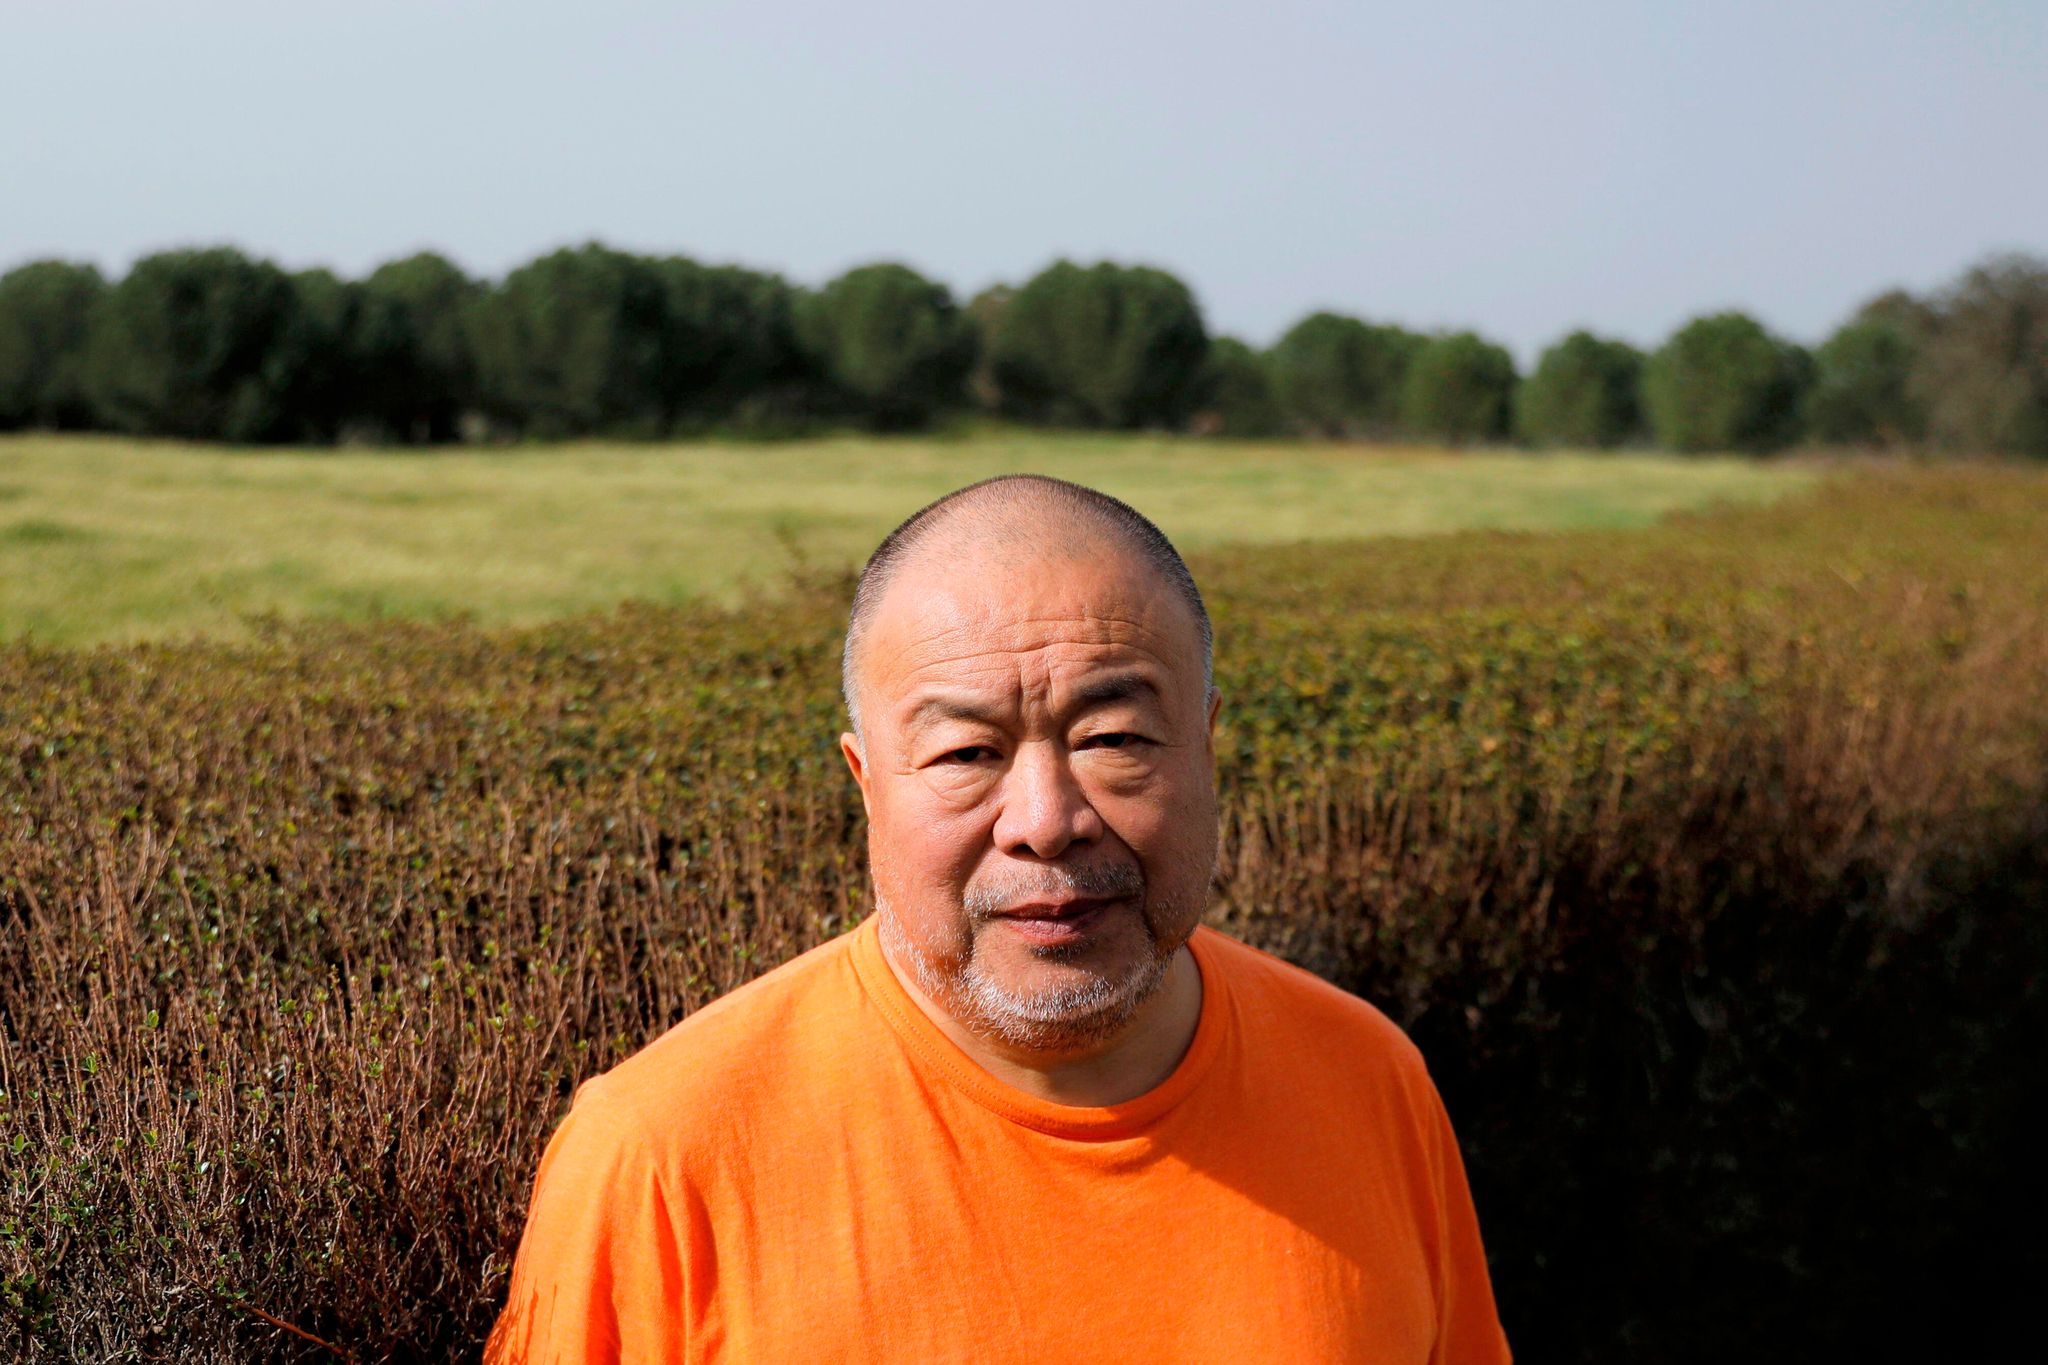 chinese artist ai weiwei poses in a portrait in front of a grassy field wearing a orange t shirt